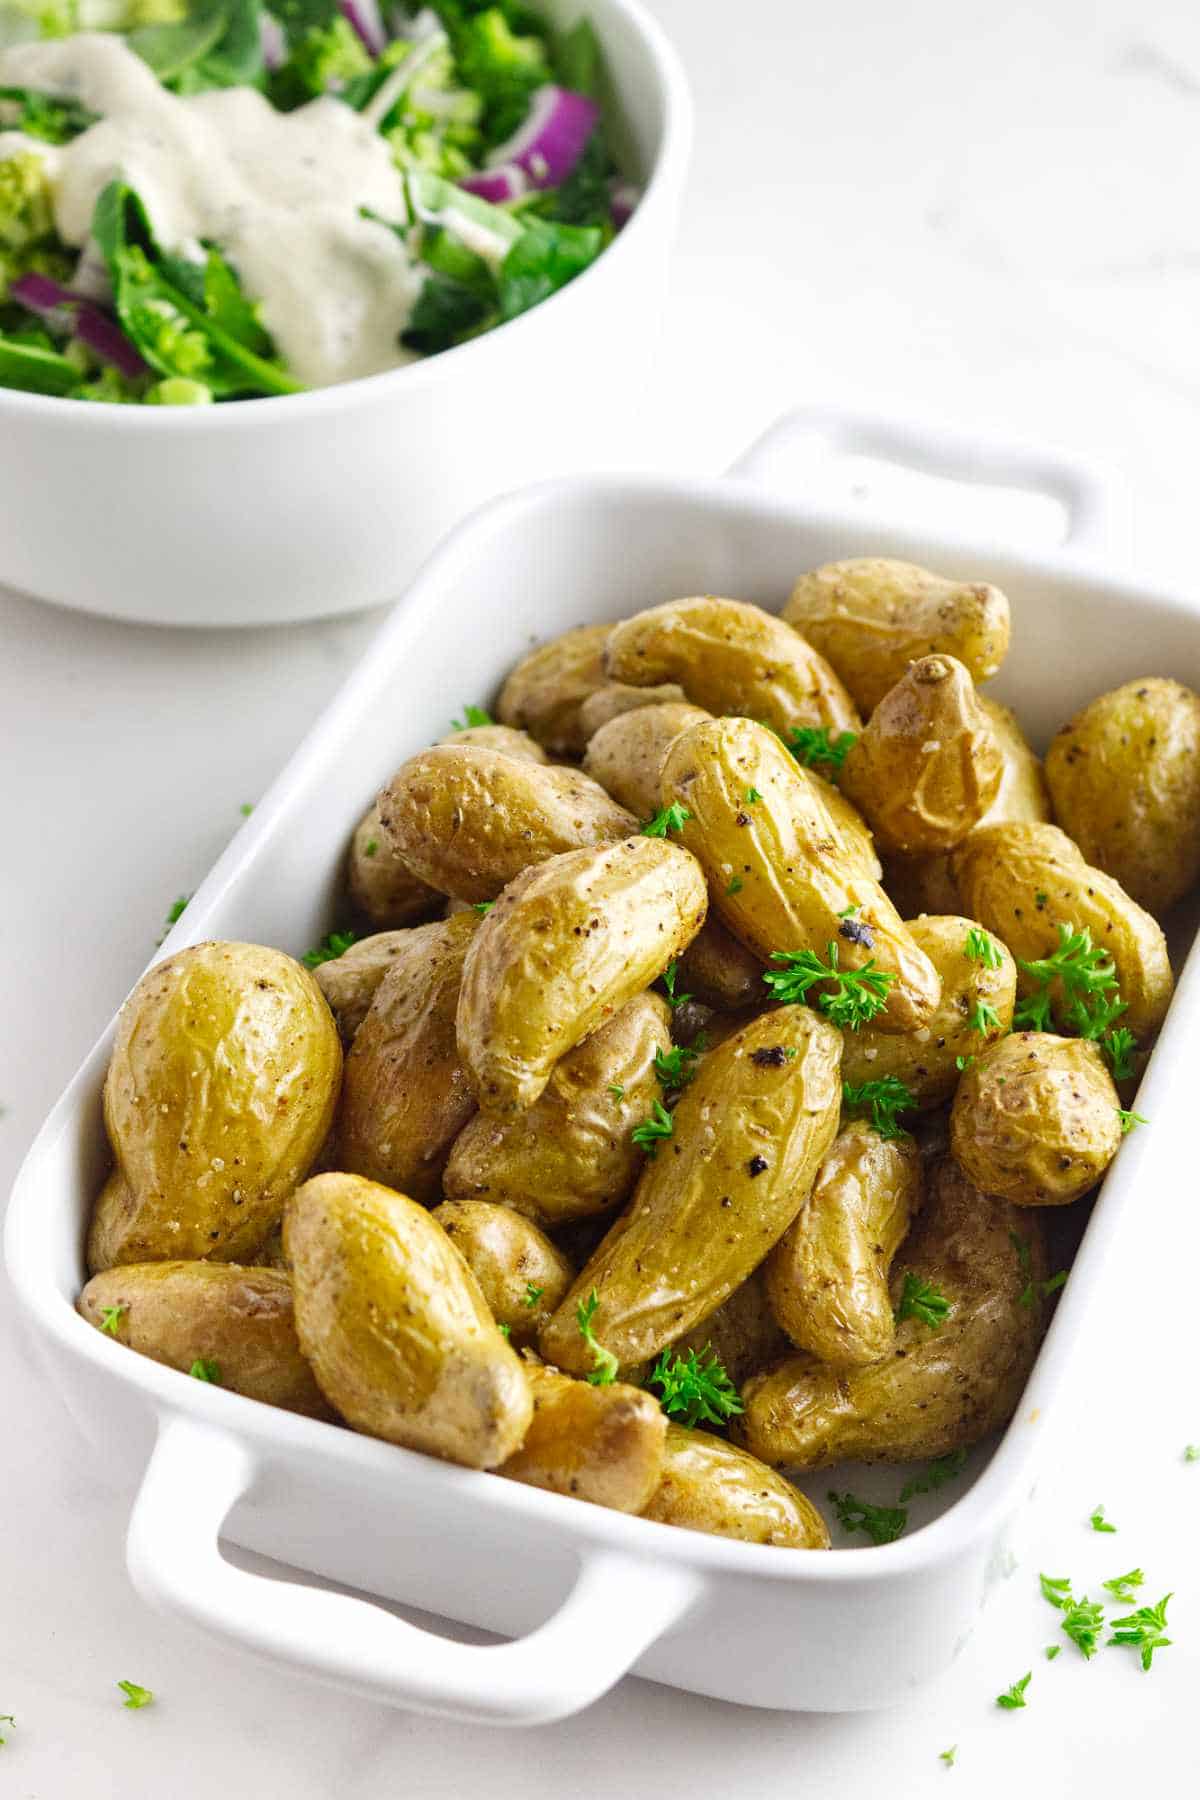 casserole serving dish filled with roasted fingerling potatoes garnished with parsley.